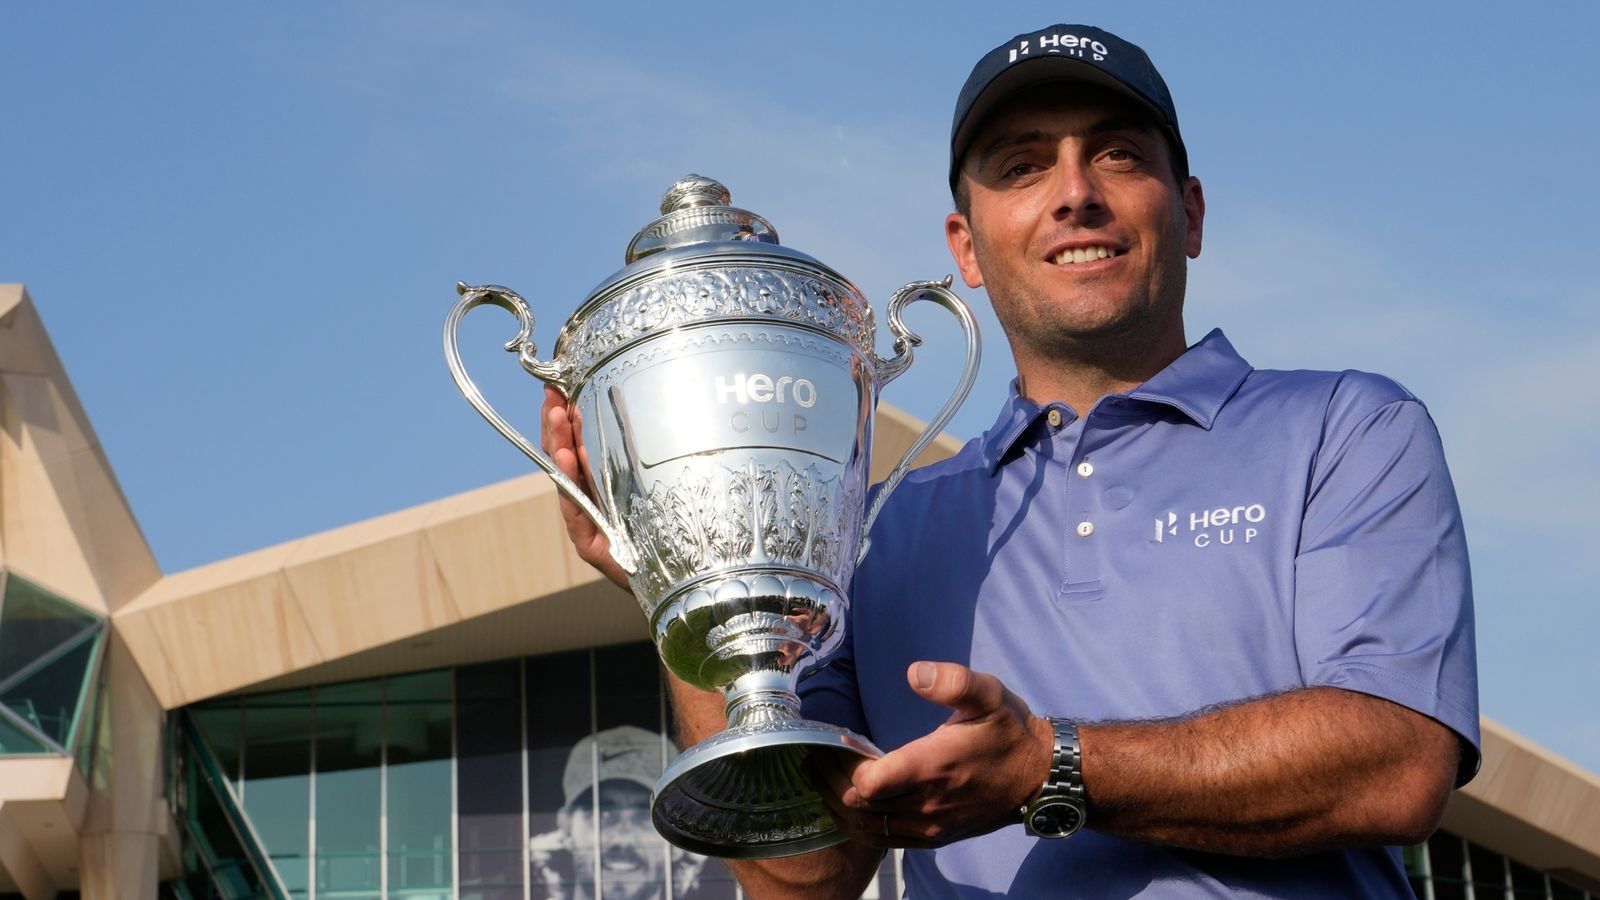 Francesco Molinari: Home Ryder Cup appearance in Italy would be incredible after Hero Cup triumph